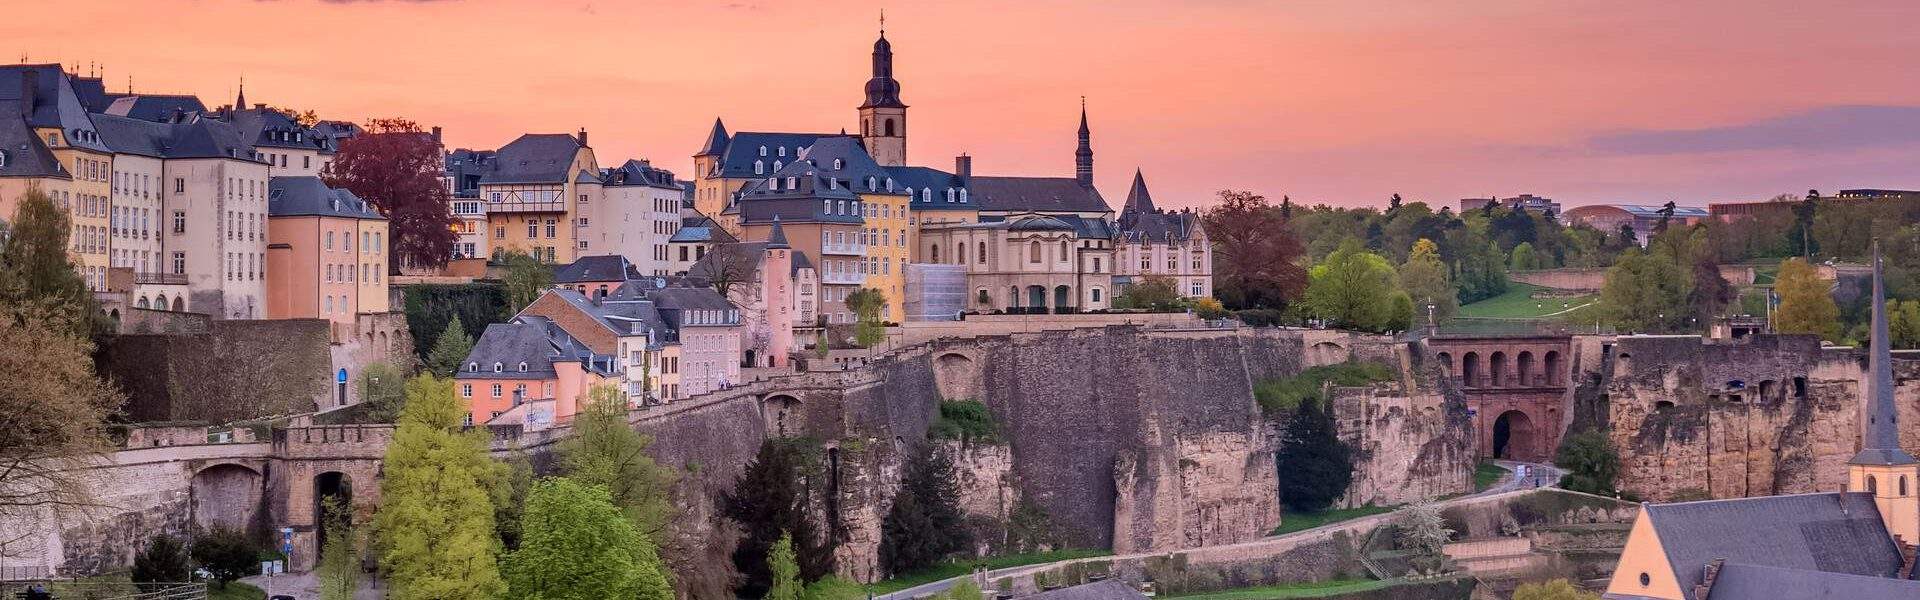 LUXEMBOURG_SUNSET